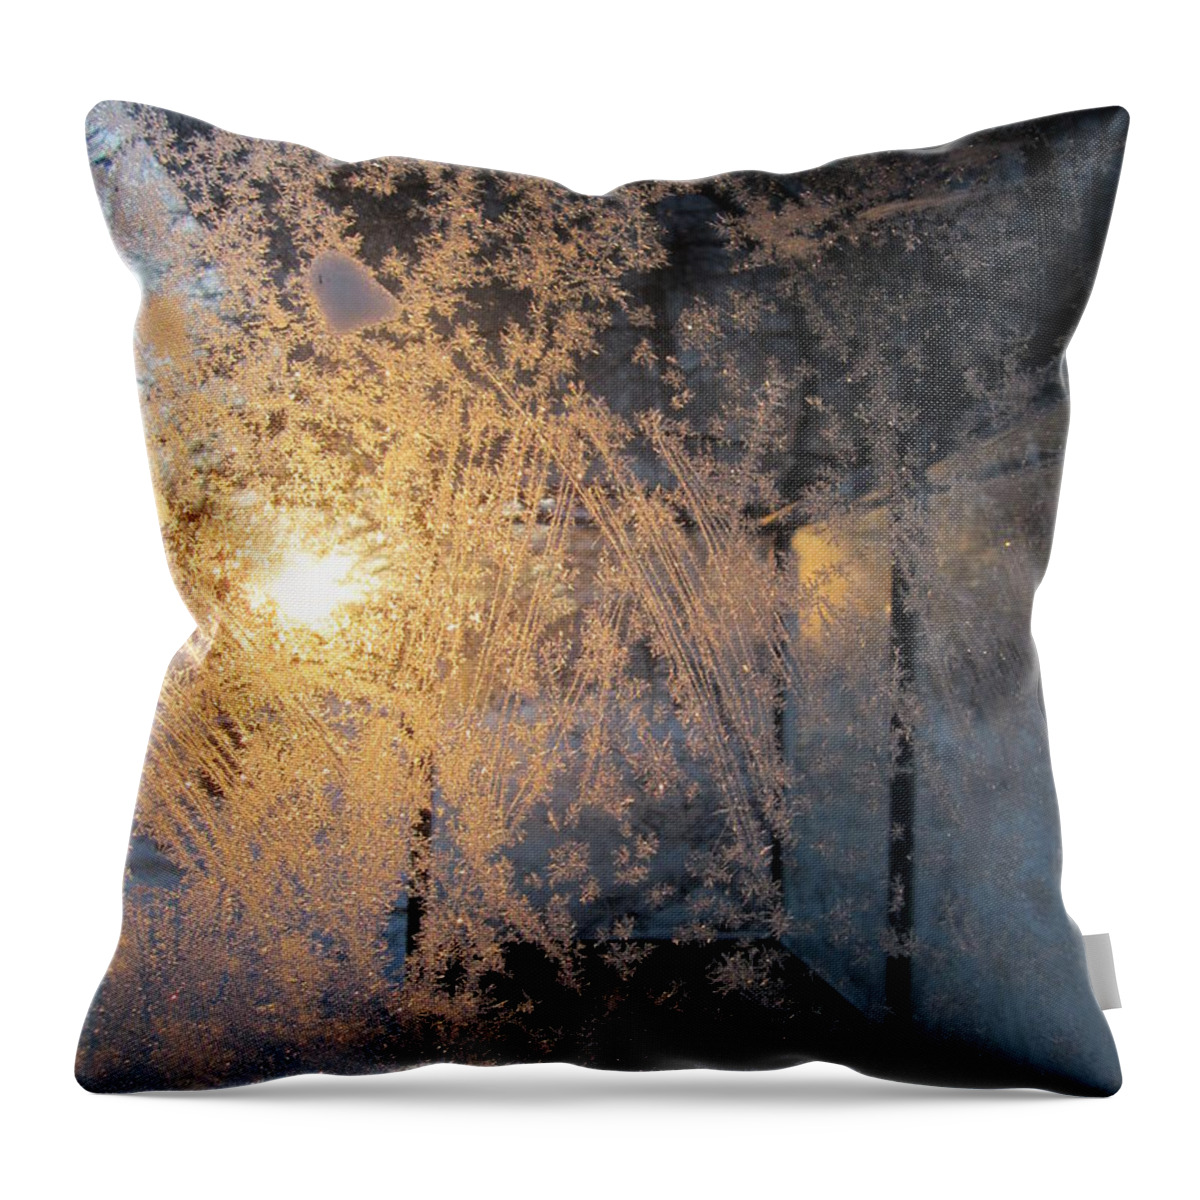 Winter Throw Pillow featuring the photograph Shines Through And Illuminates The Day by Rosita Larsson